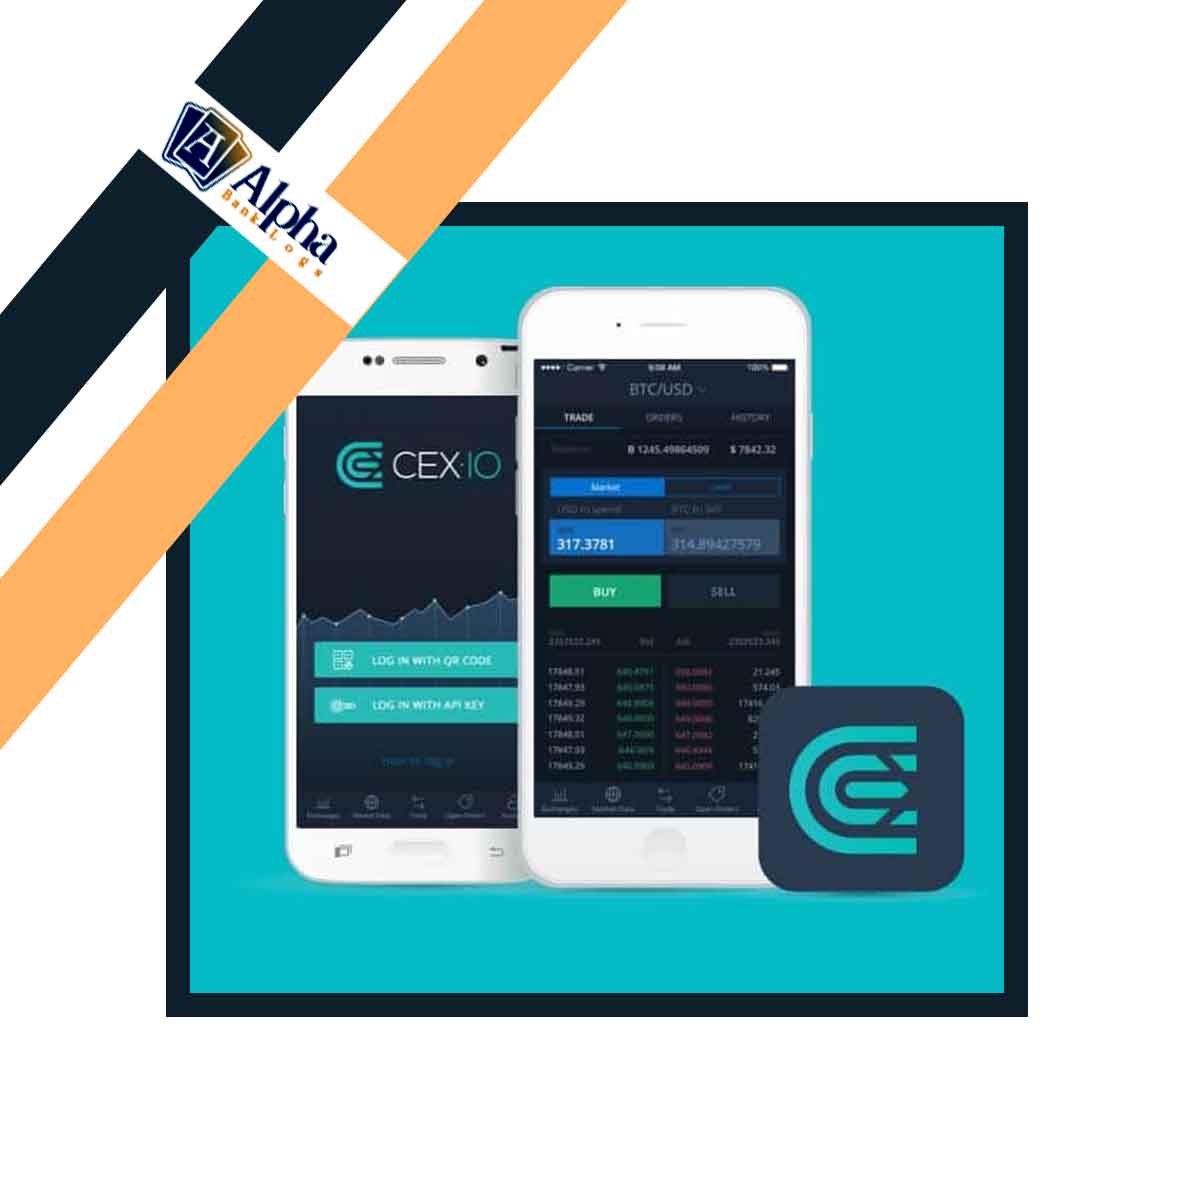 US CEX.IO Verified Account – Stage 2 Fully Verified + Google Voice 2FA + RDP